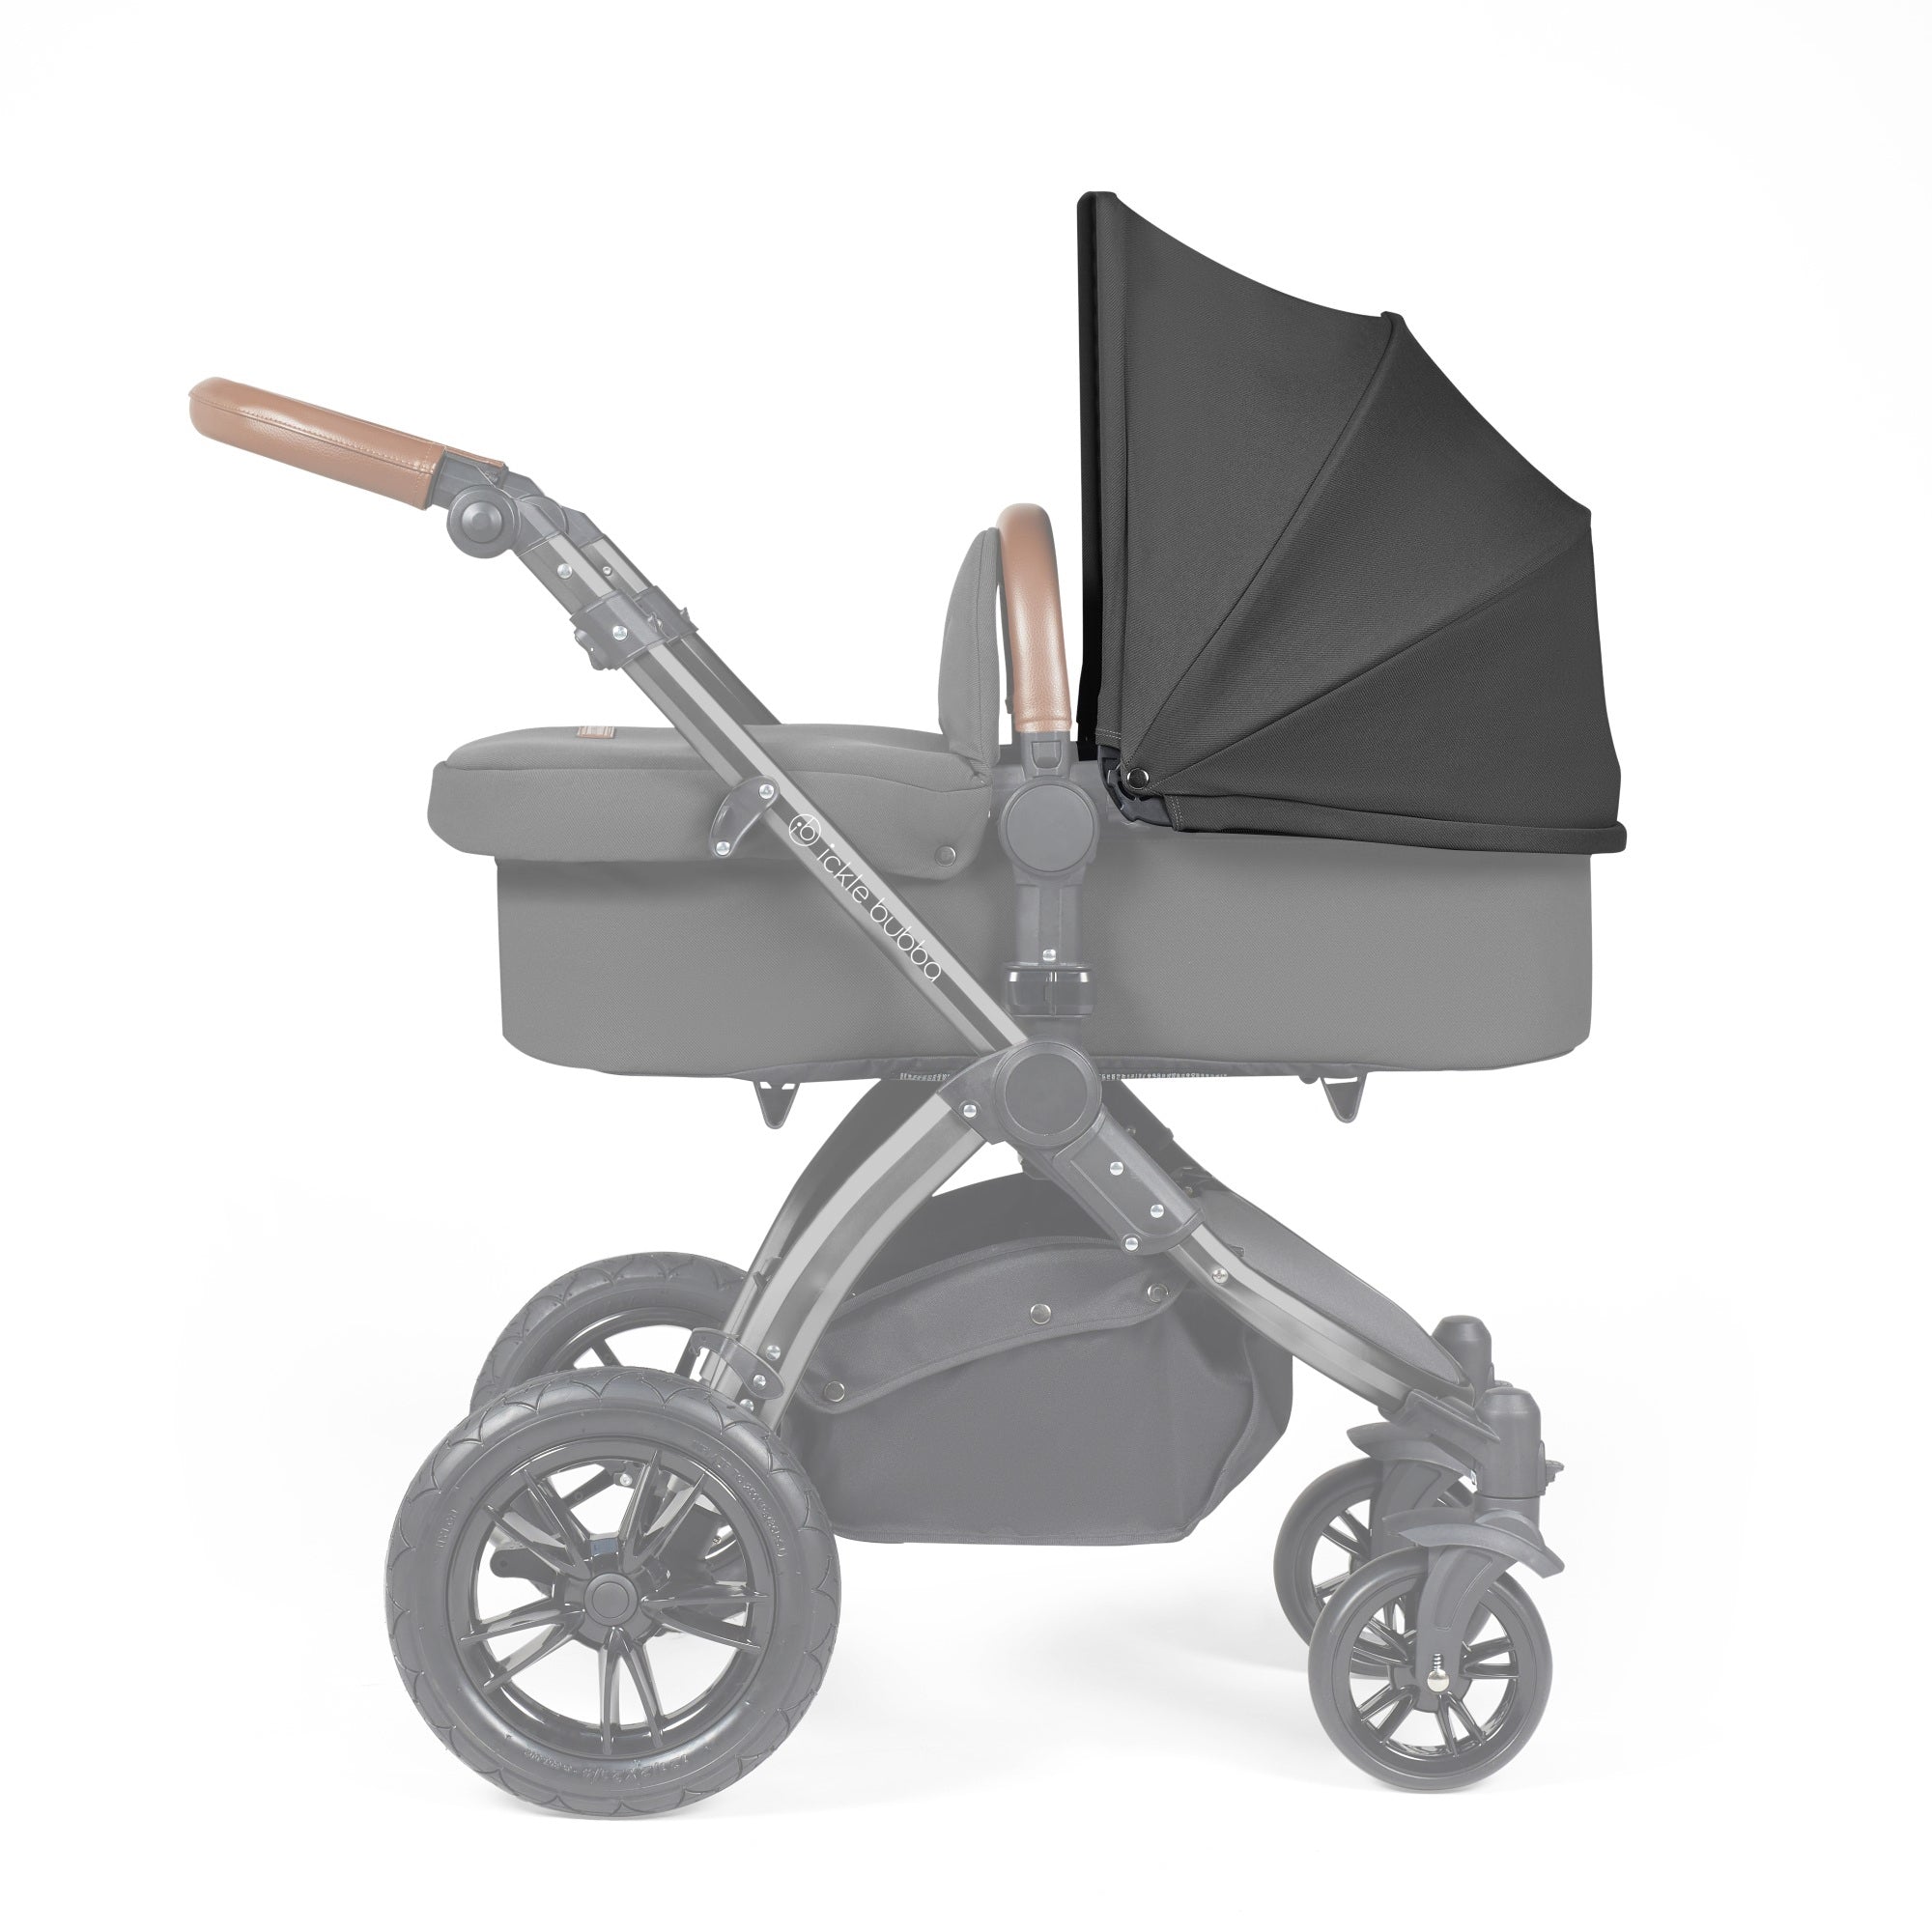 Stomp Urban/Luxe Carrycot/Seat Hood Complete